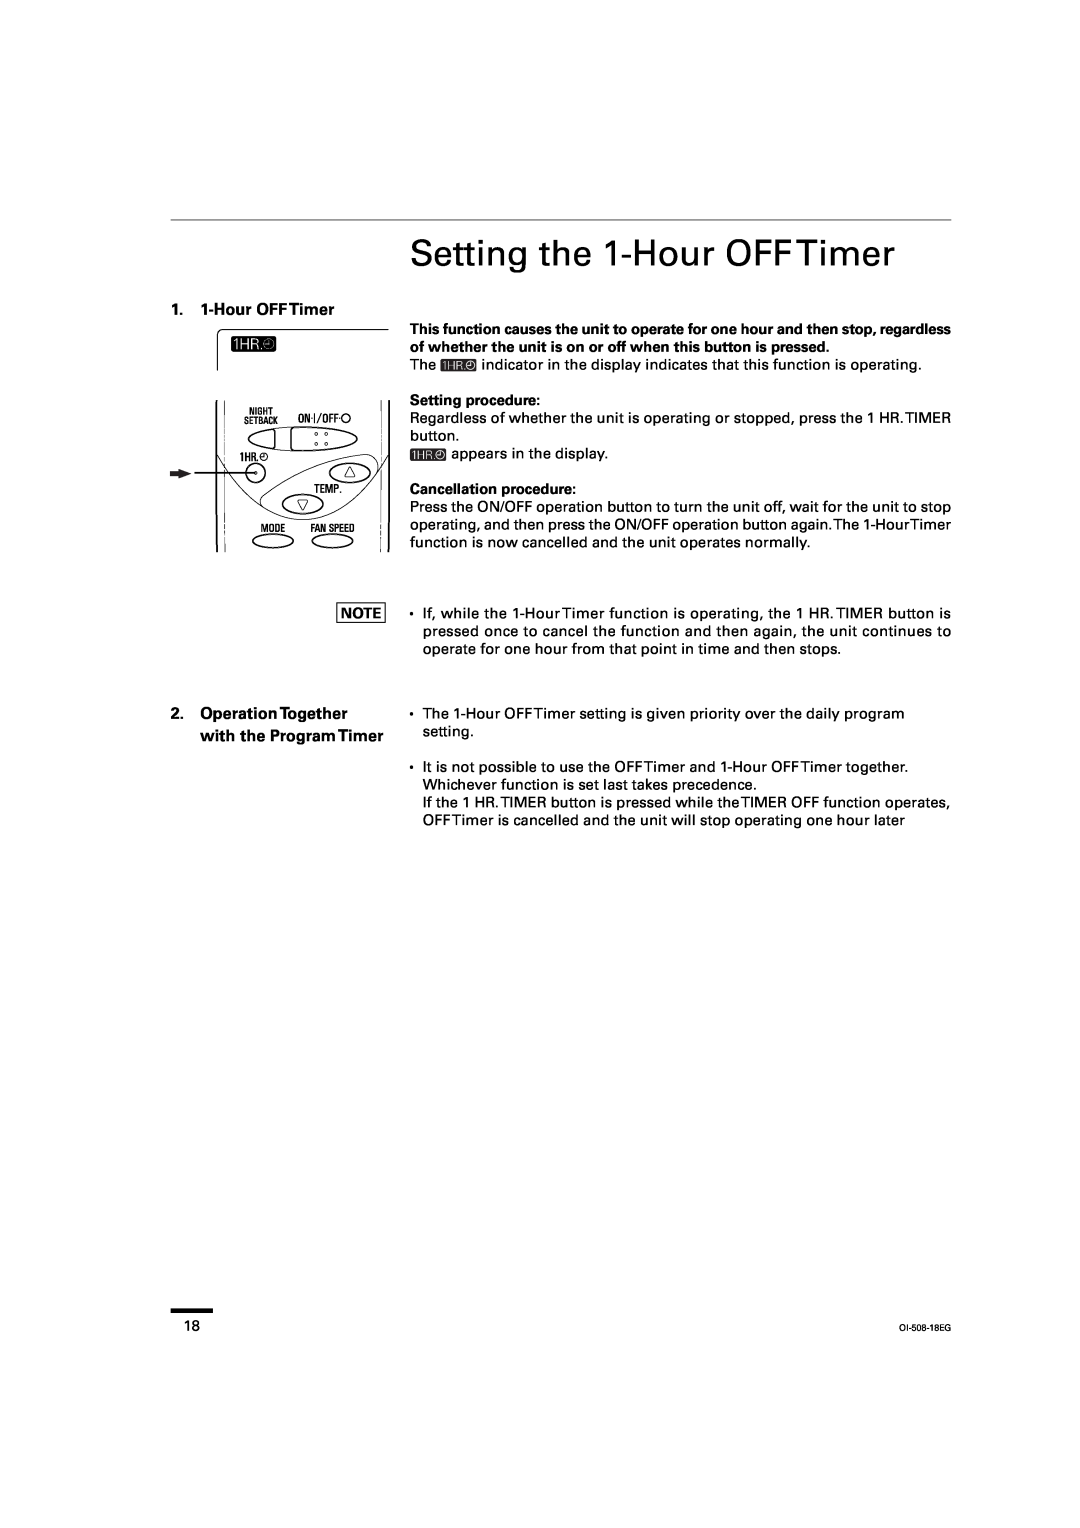 Sanyo KS2462R Setting the 1-HourOFFTimer, HourOFF Timer, Operation Together with the Program Timer, Setting procedure 